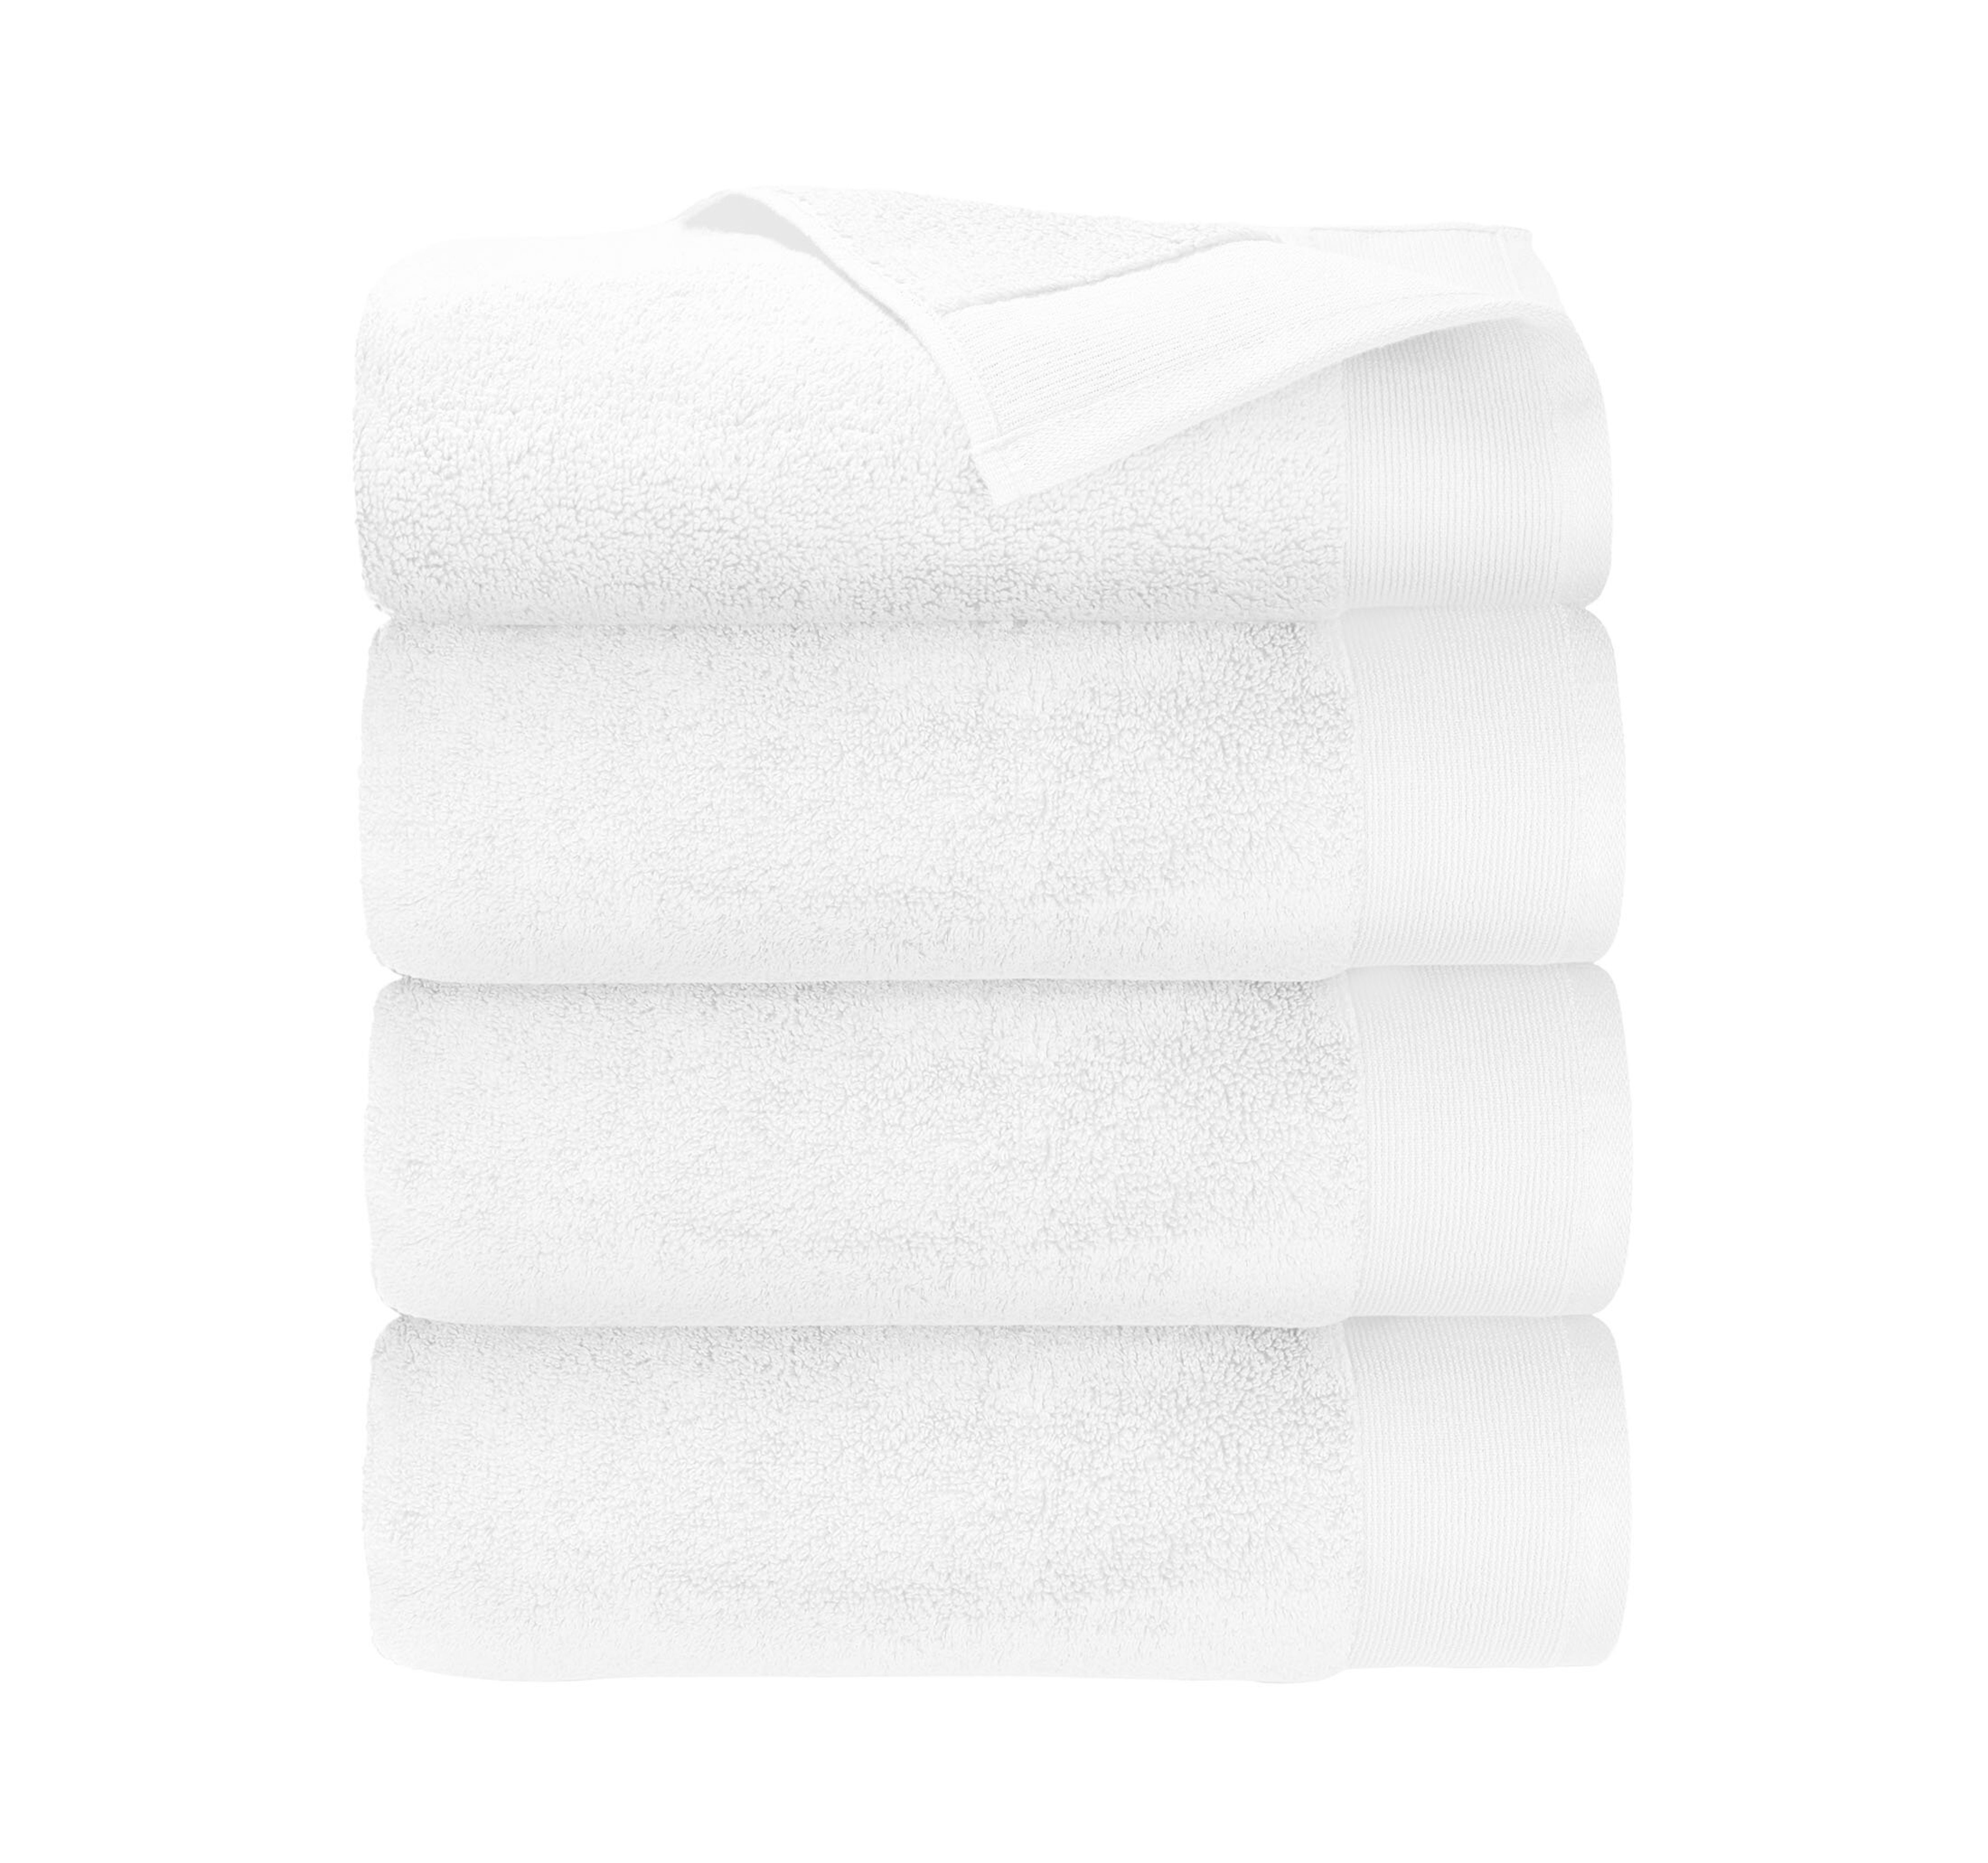 Hiorie Hotel Soft Water-Absorption Fluffy Mini Bath Towel 1 Sheets Cot –  LUXCRAS